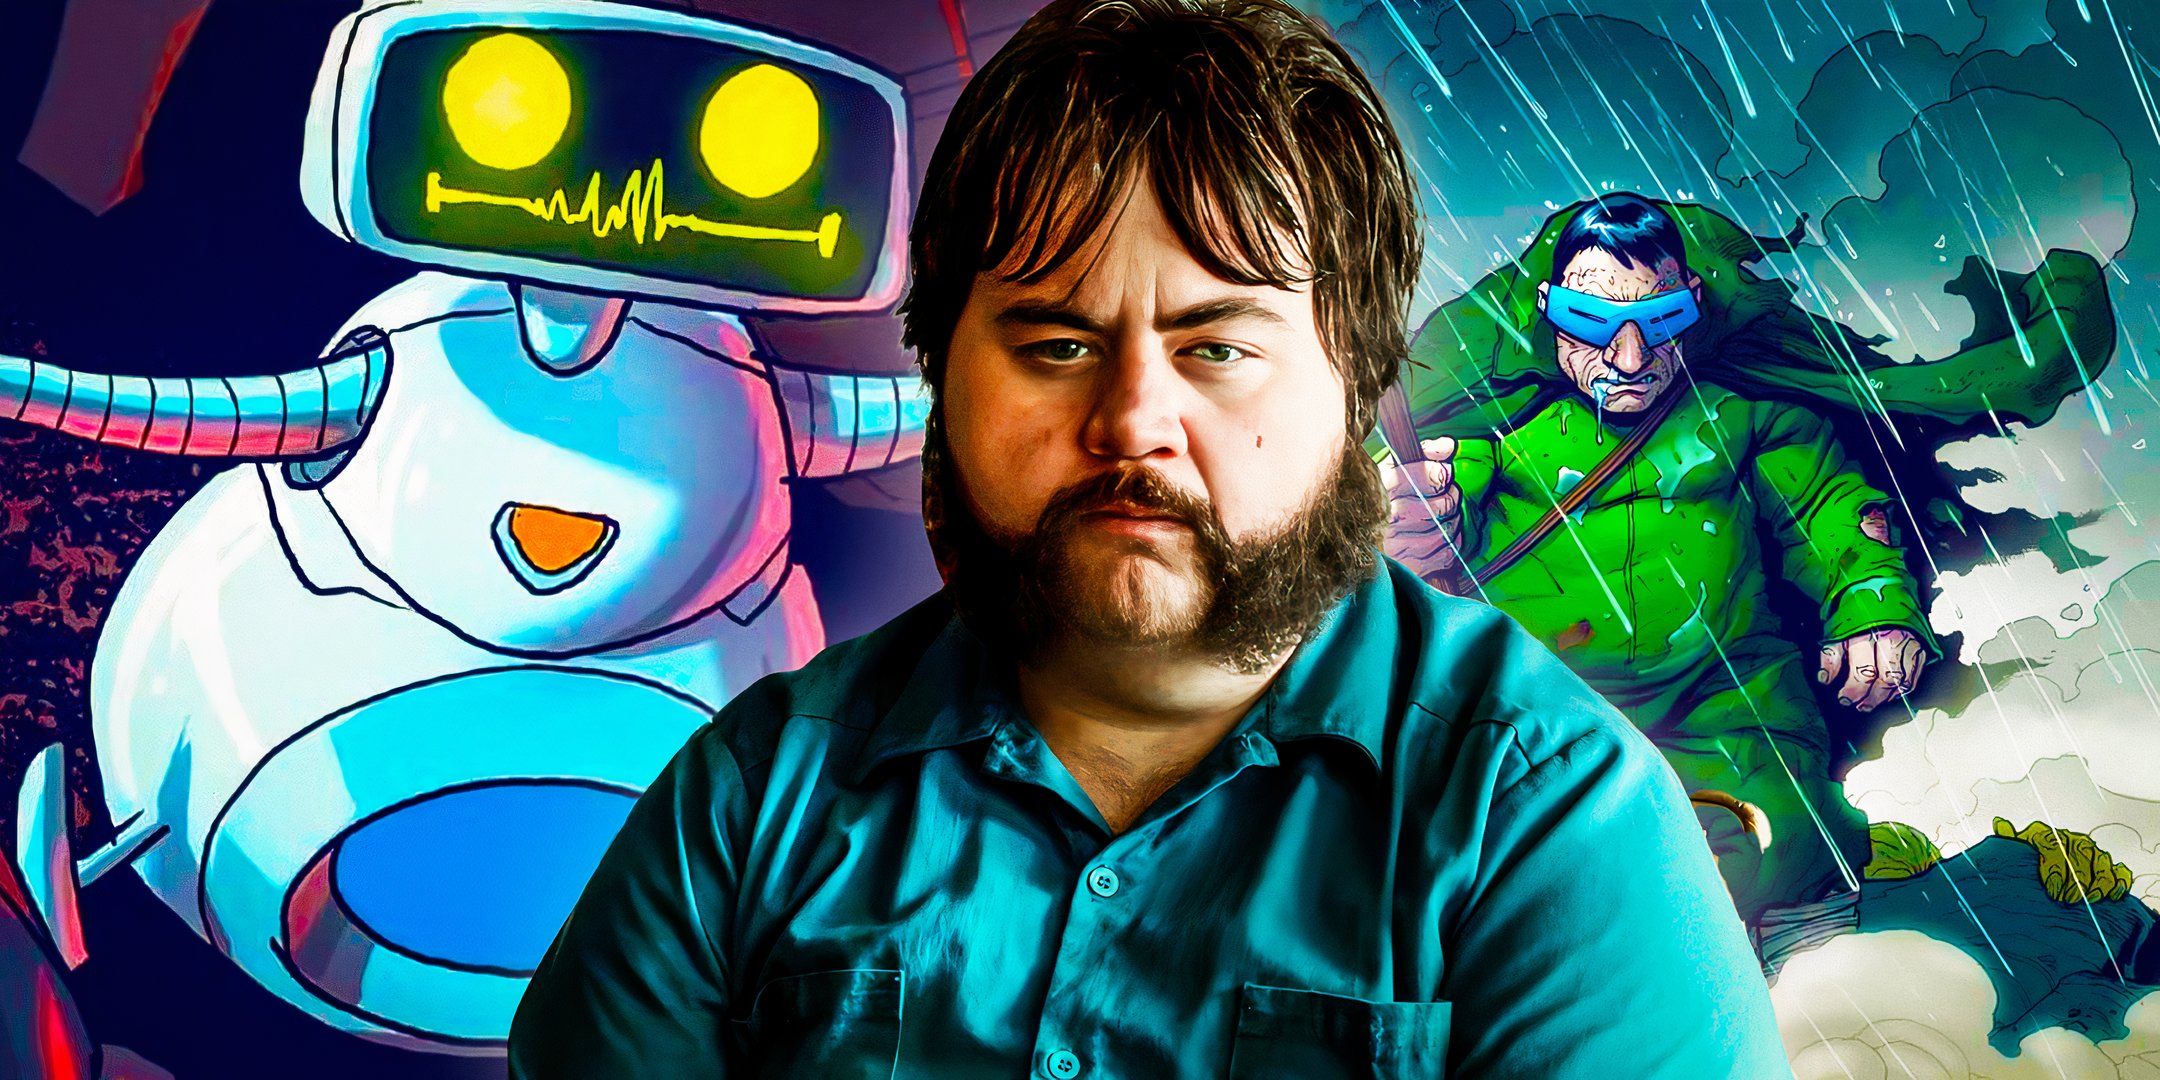 Paul Walter Hauser as Larry Hall in Black Bird with HERBIE and Mole Man in Marvel Comics